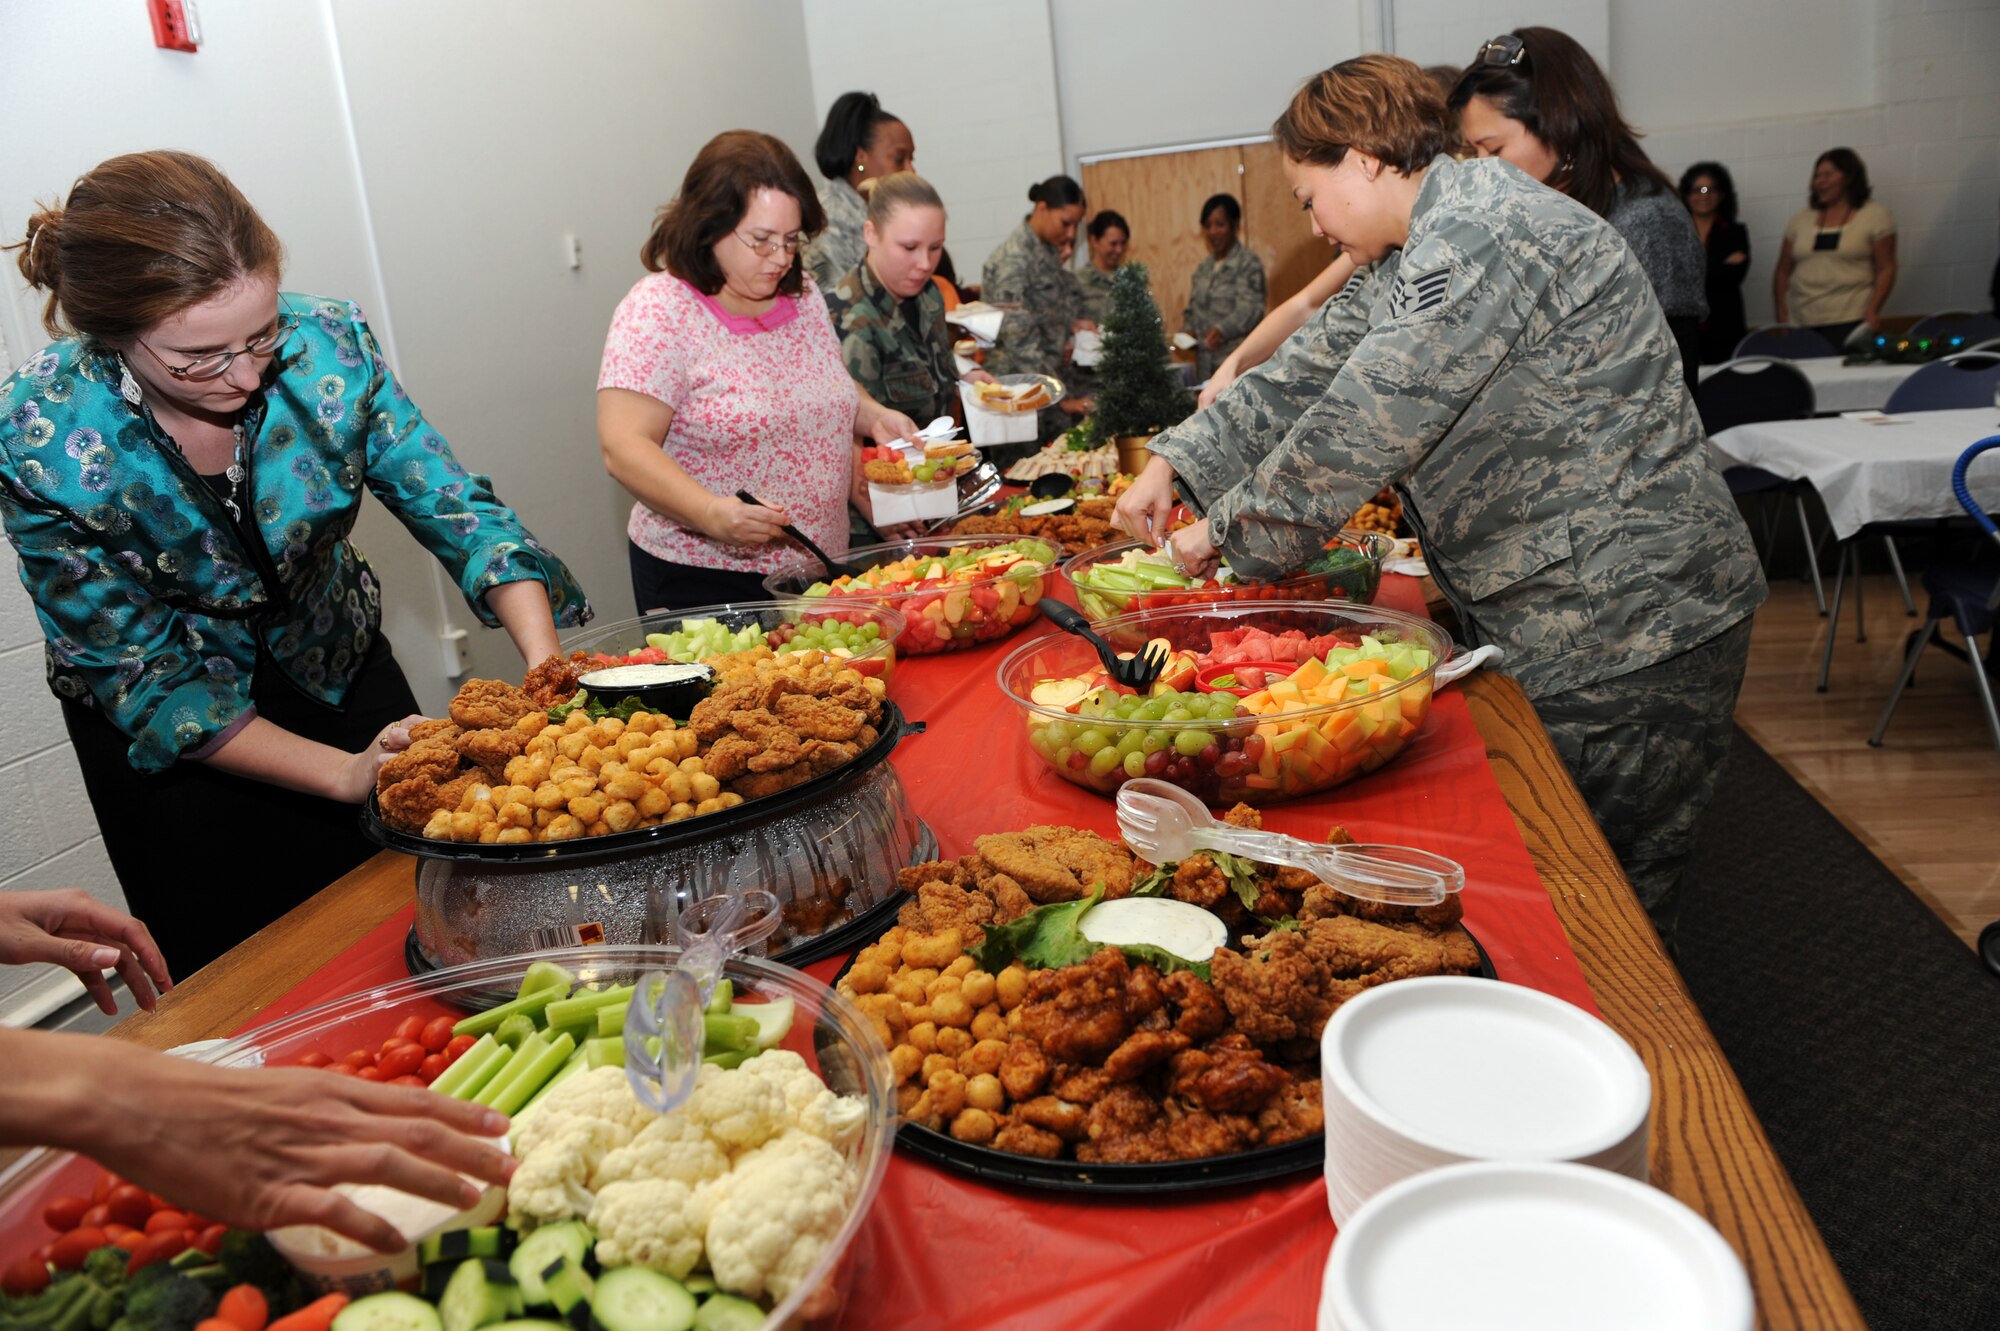 Women who attended the first-ever Women?s Luncheon choose from a variety of food at the Community Center at Holloman Air Force Base, N.M., Dec. 2. The luncheon brought more than 120 women together for spiritual encouragement during the stressful holiday season. (U.S. Air Force photo/Airman Sondra M. Escutia)